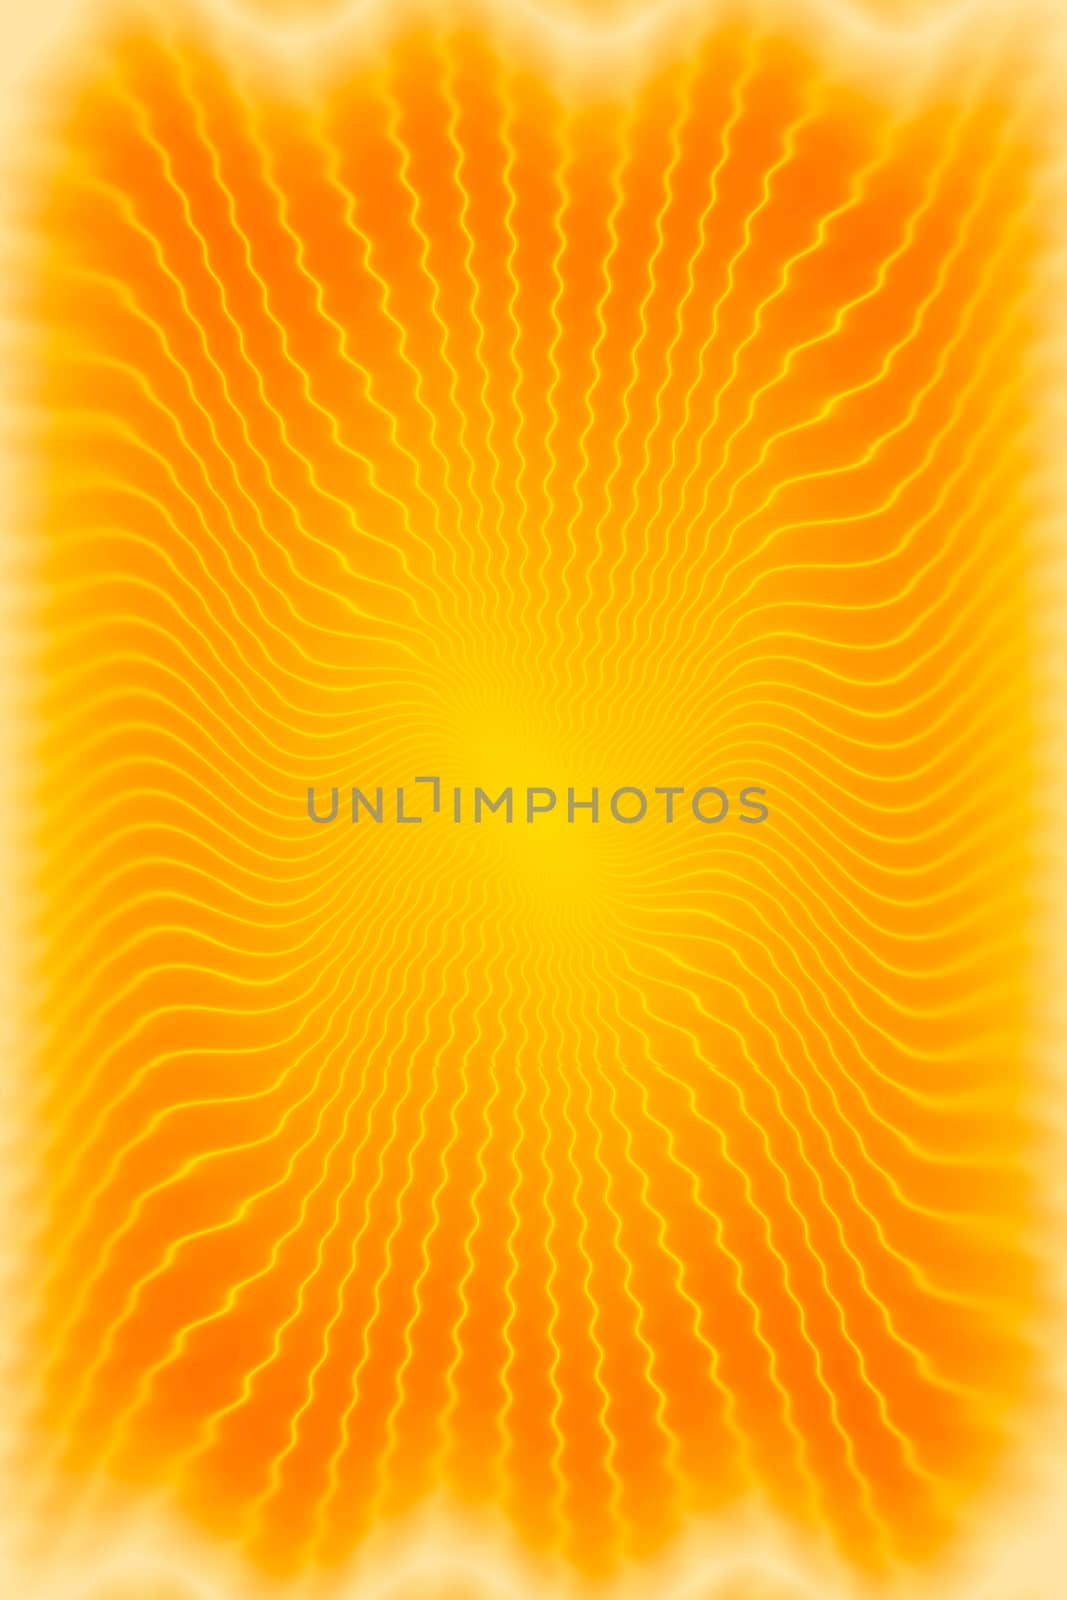 Abstract sunburst background or texture in warm colors by Attila